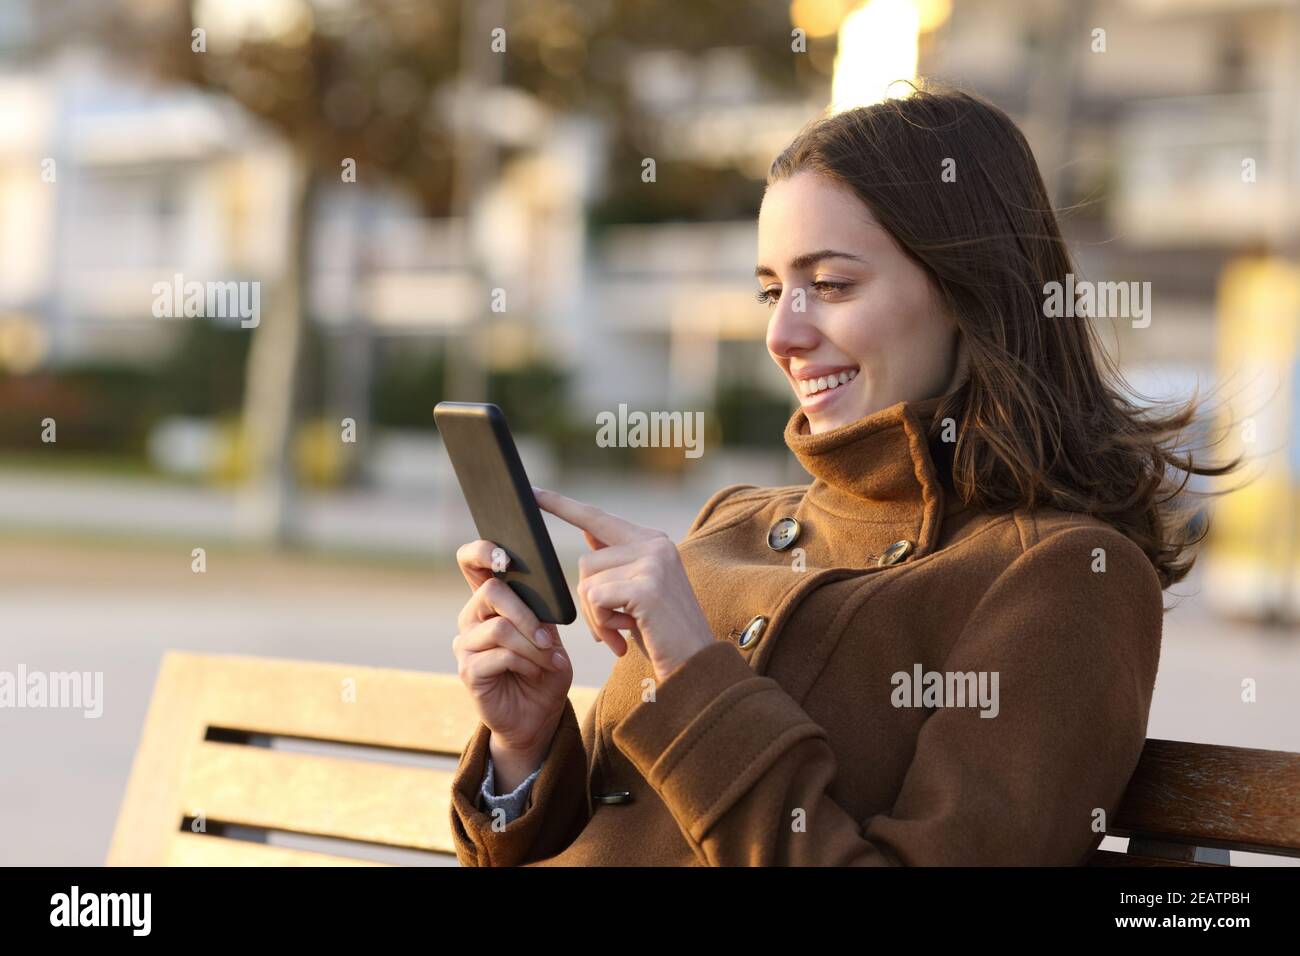 Happy woman in winter using smart phone on a bench Stock Photo